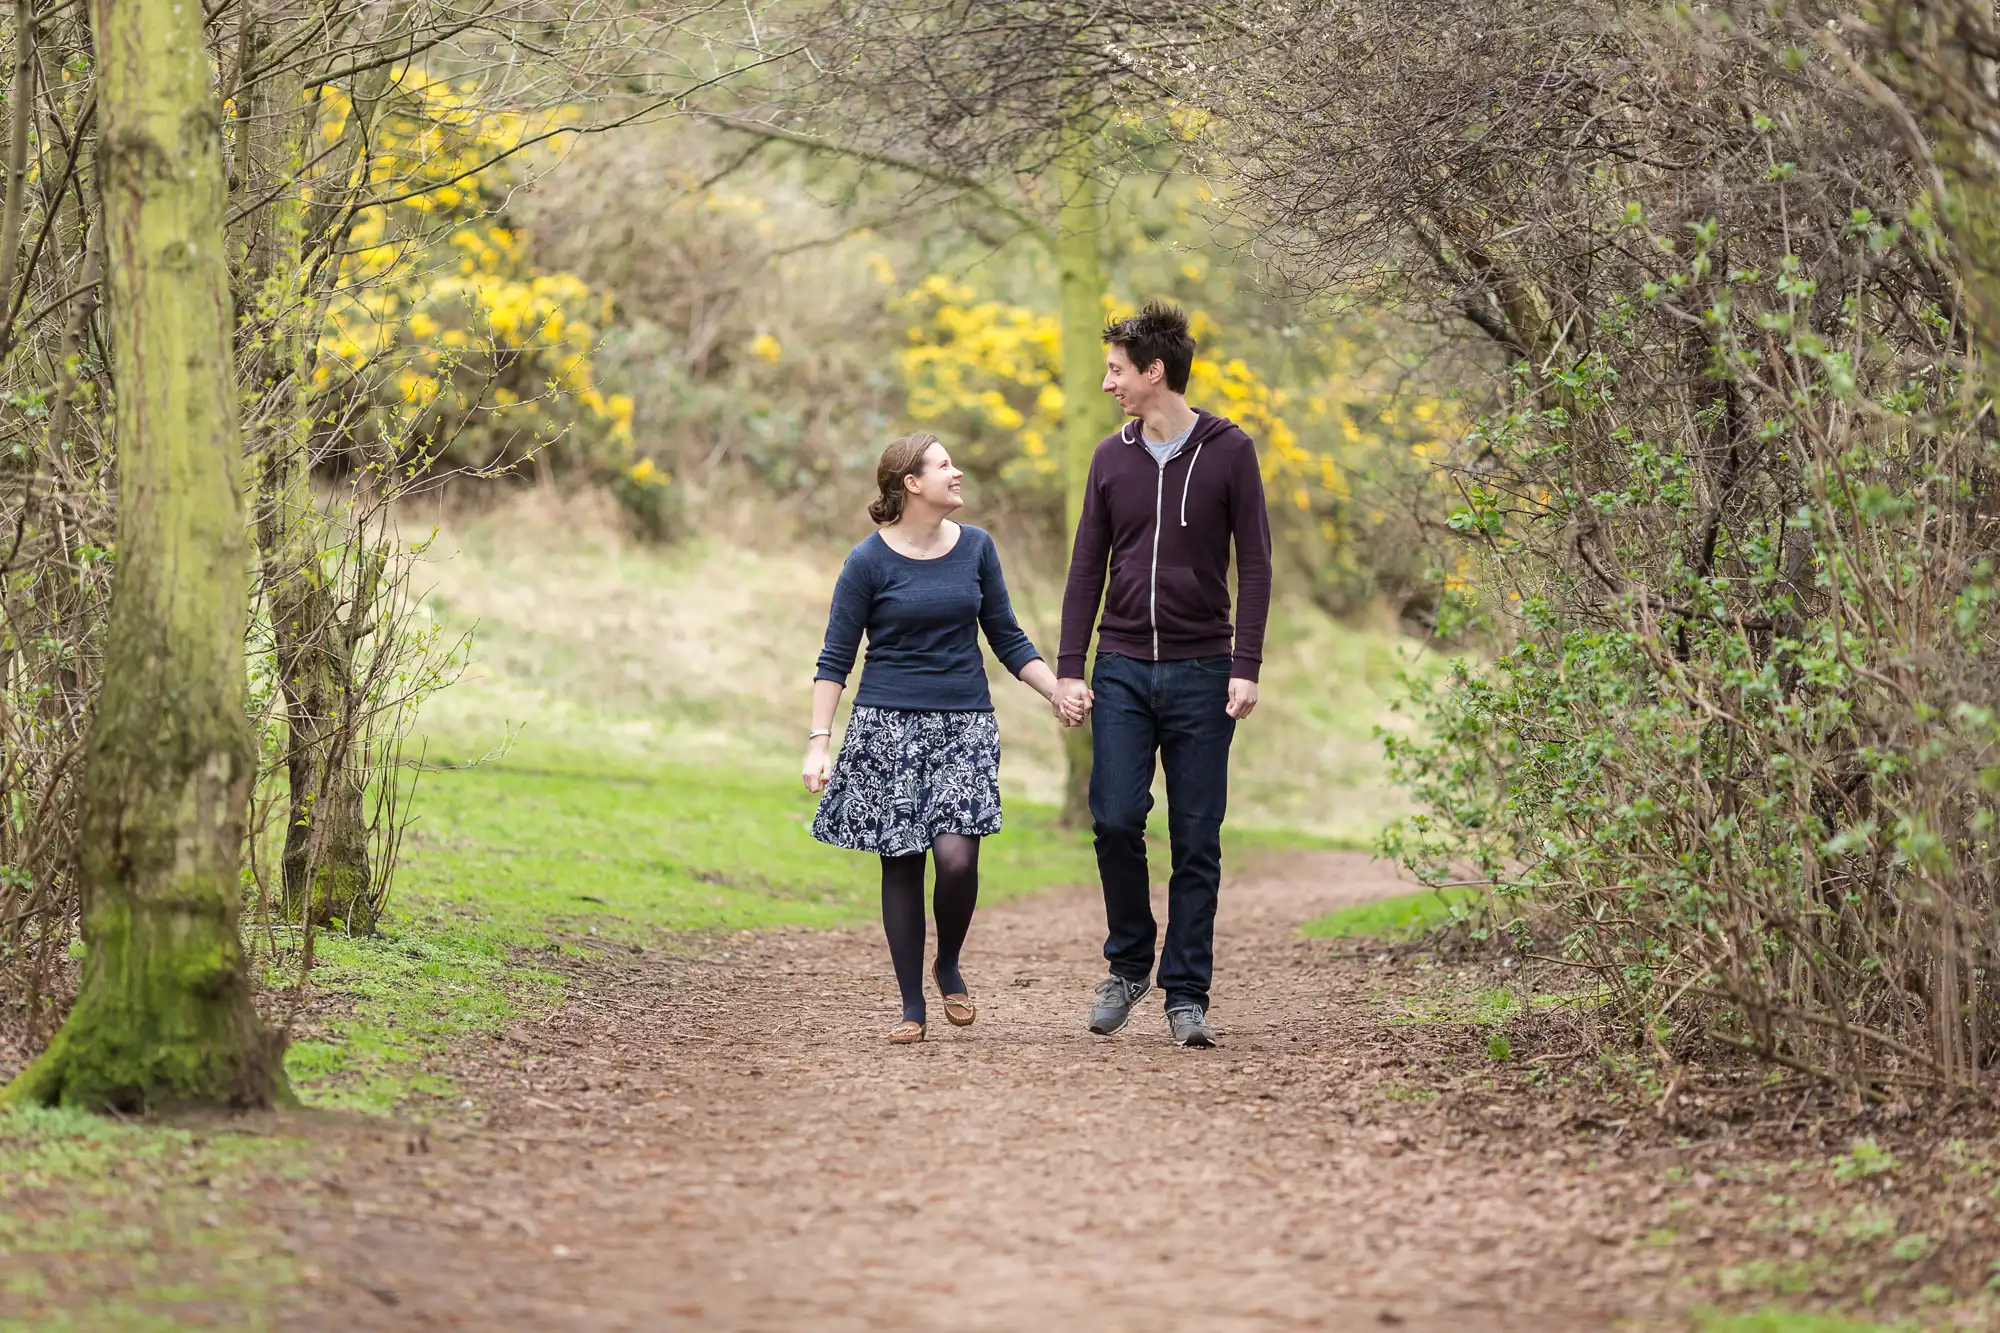 A couple holding hands while walking on a forest path, with yellow flowers in the background.